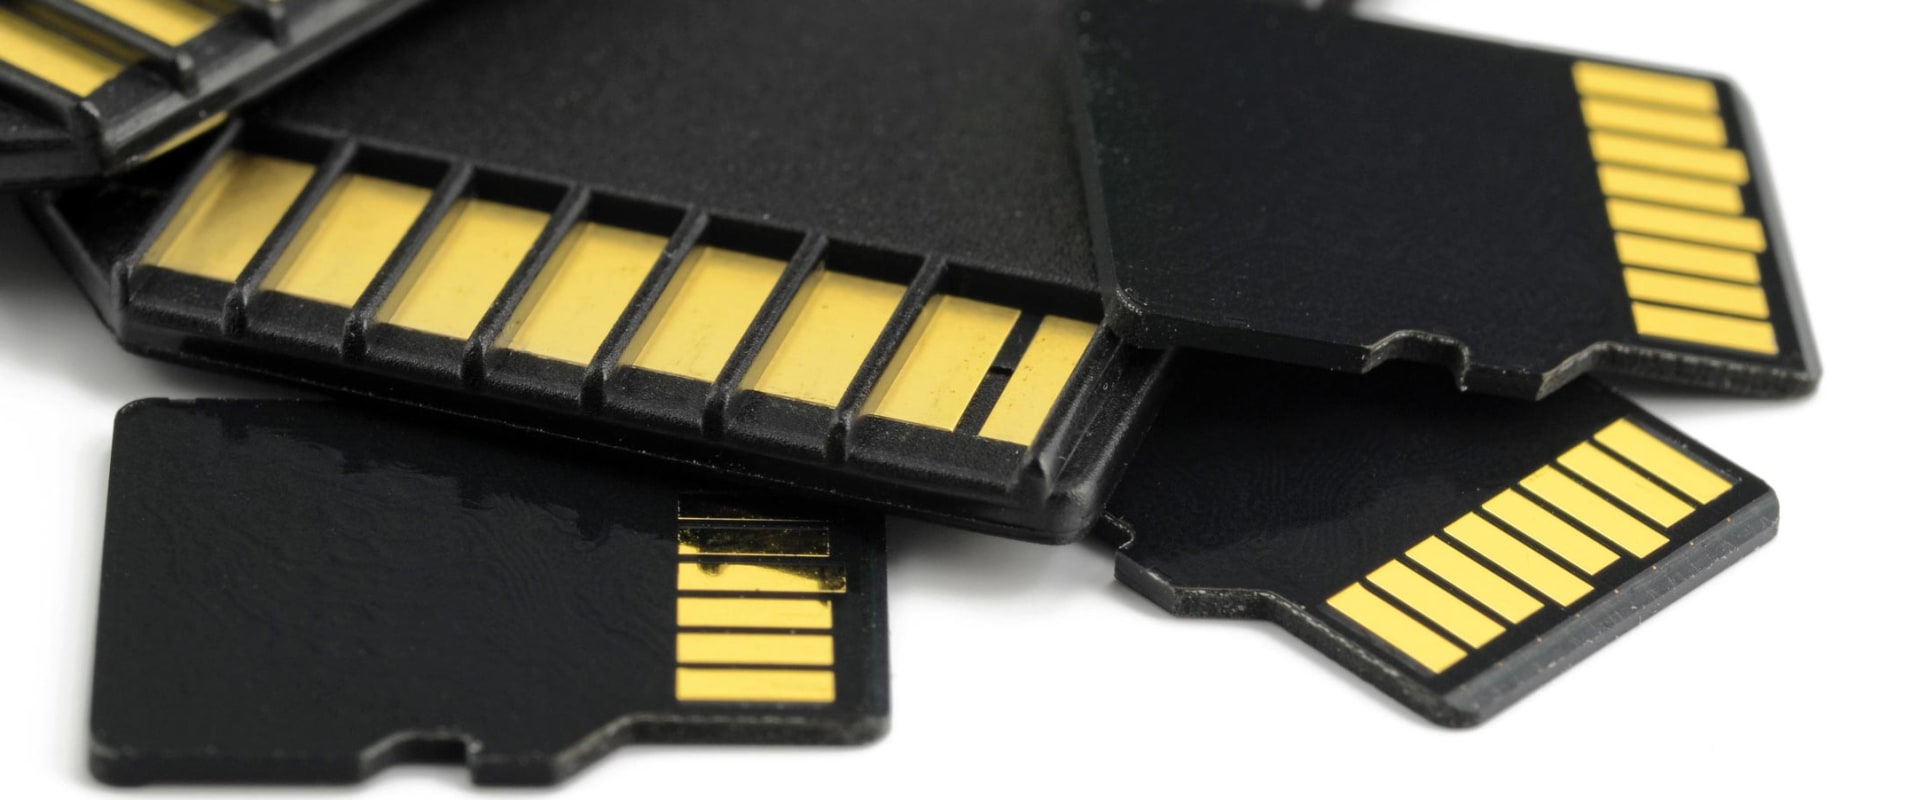 Everything You Need to Know About Memory Card Storage Capacity